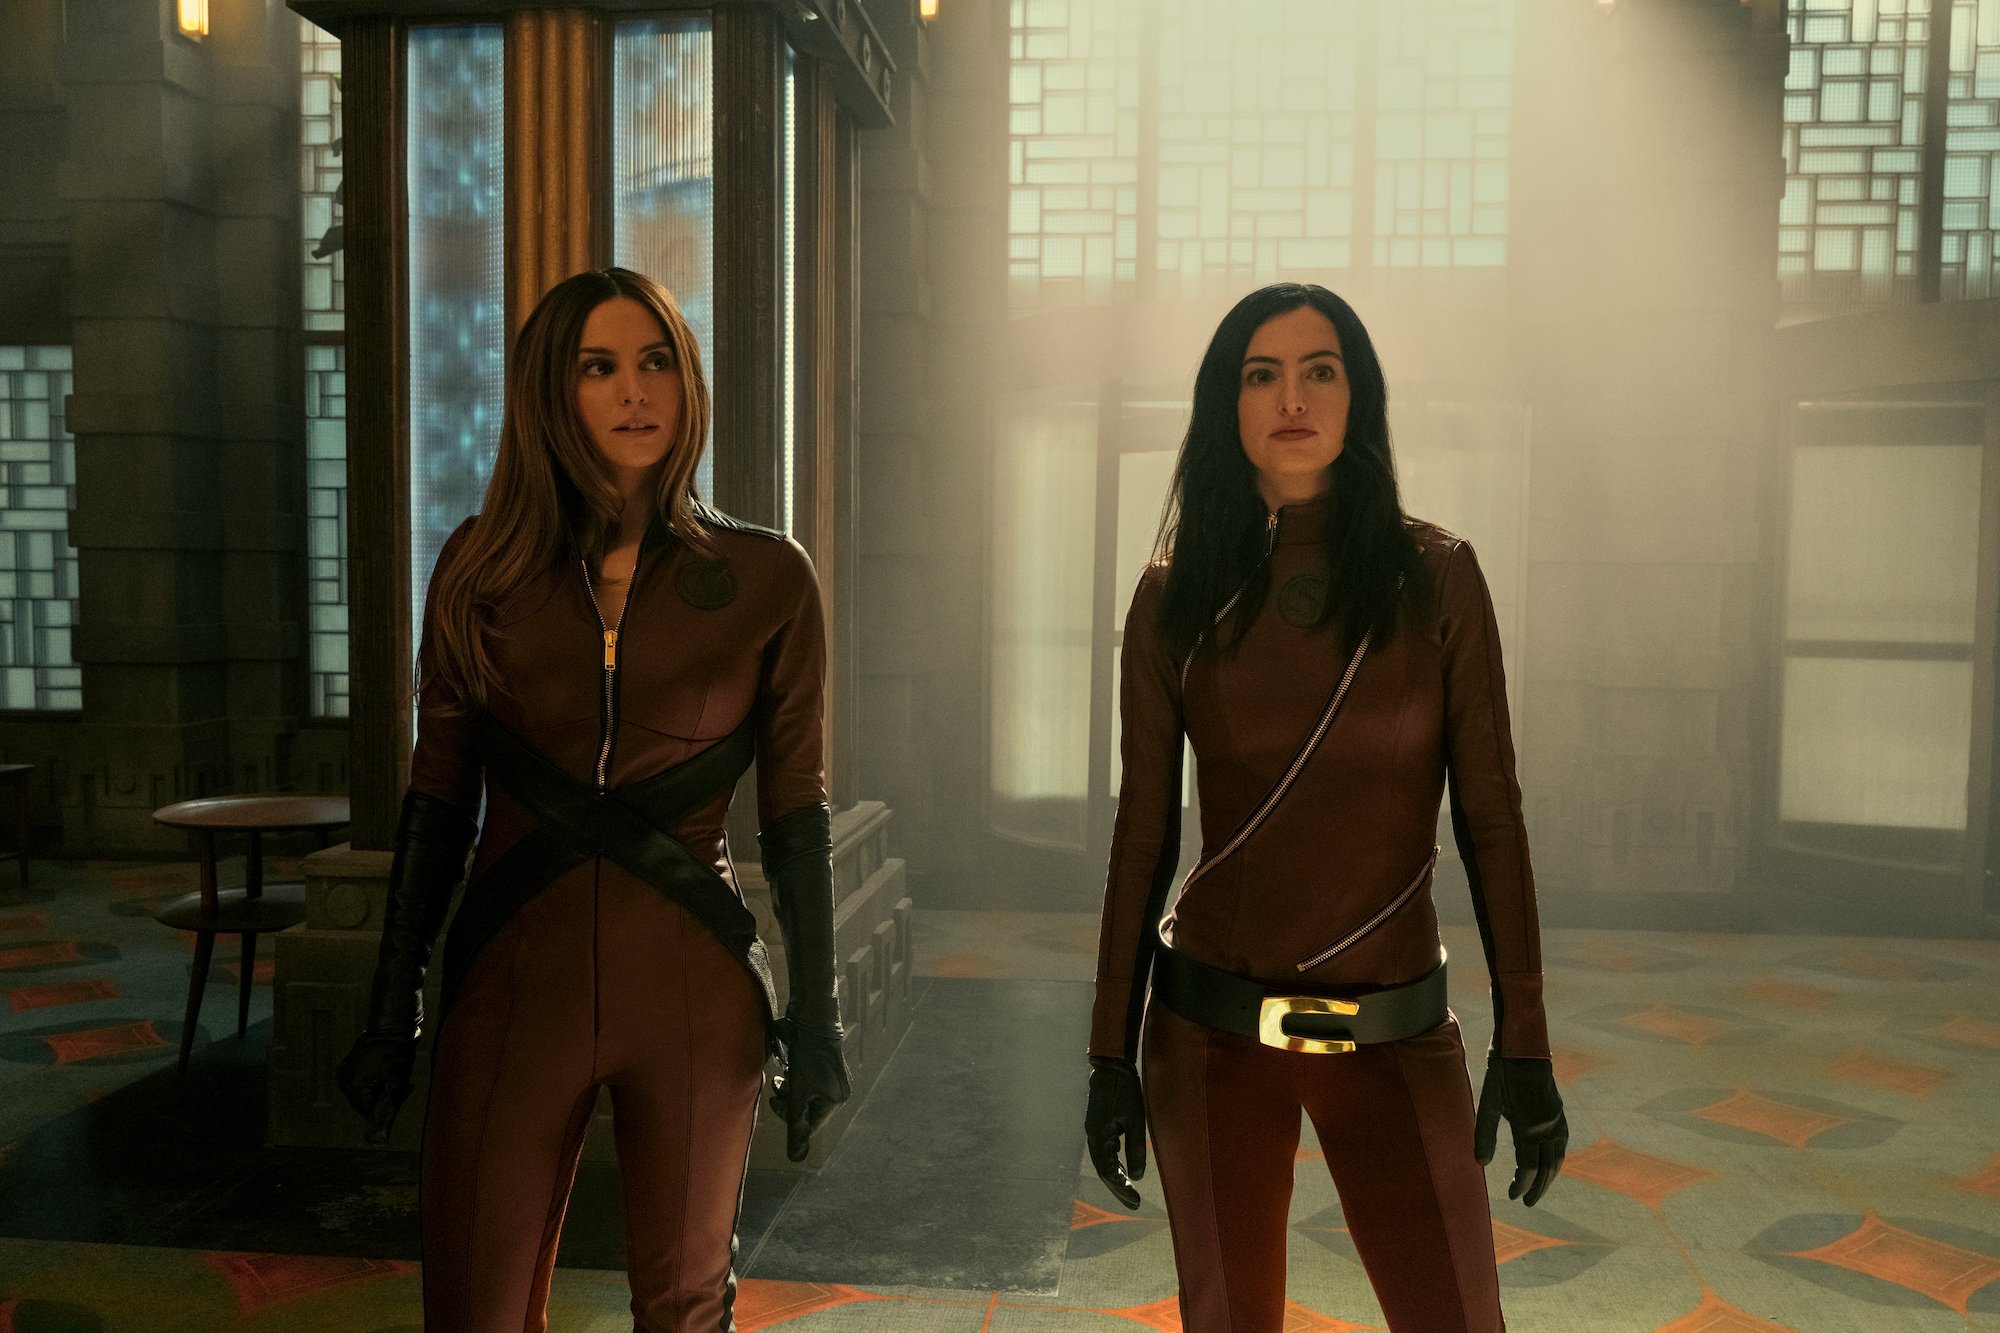 'The Umbrella Academy' Season 3 new images feature Genesis Rodriguez as Sloane and Cazzie David as Jayme in a production still.